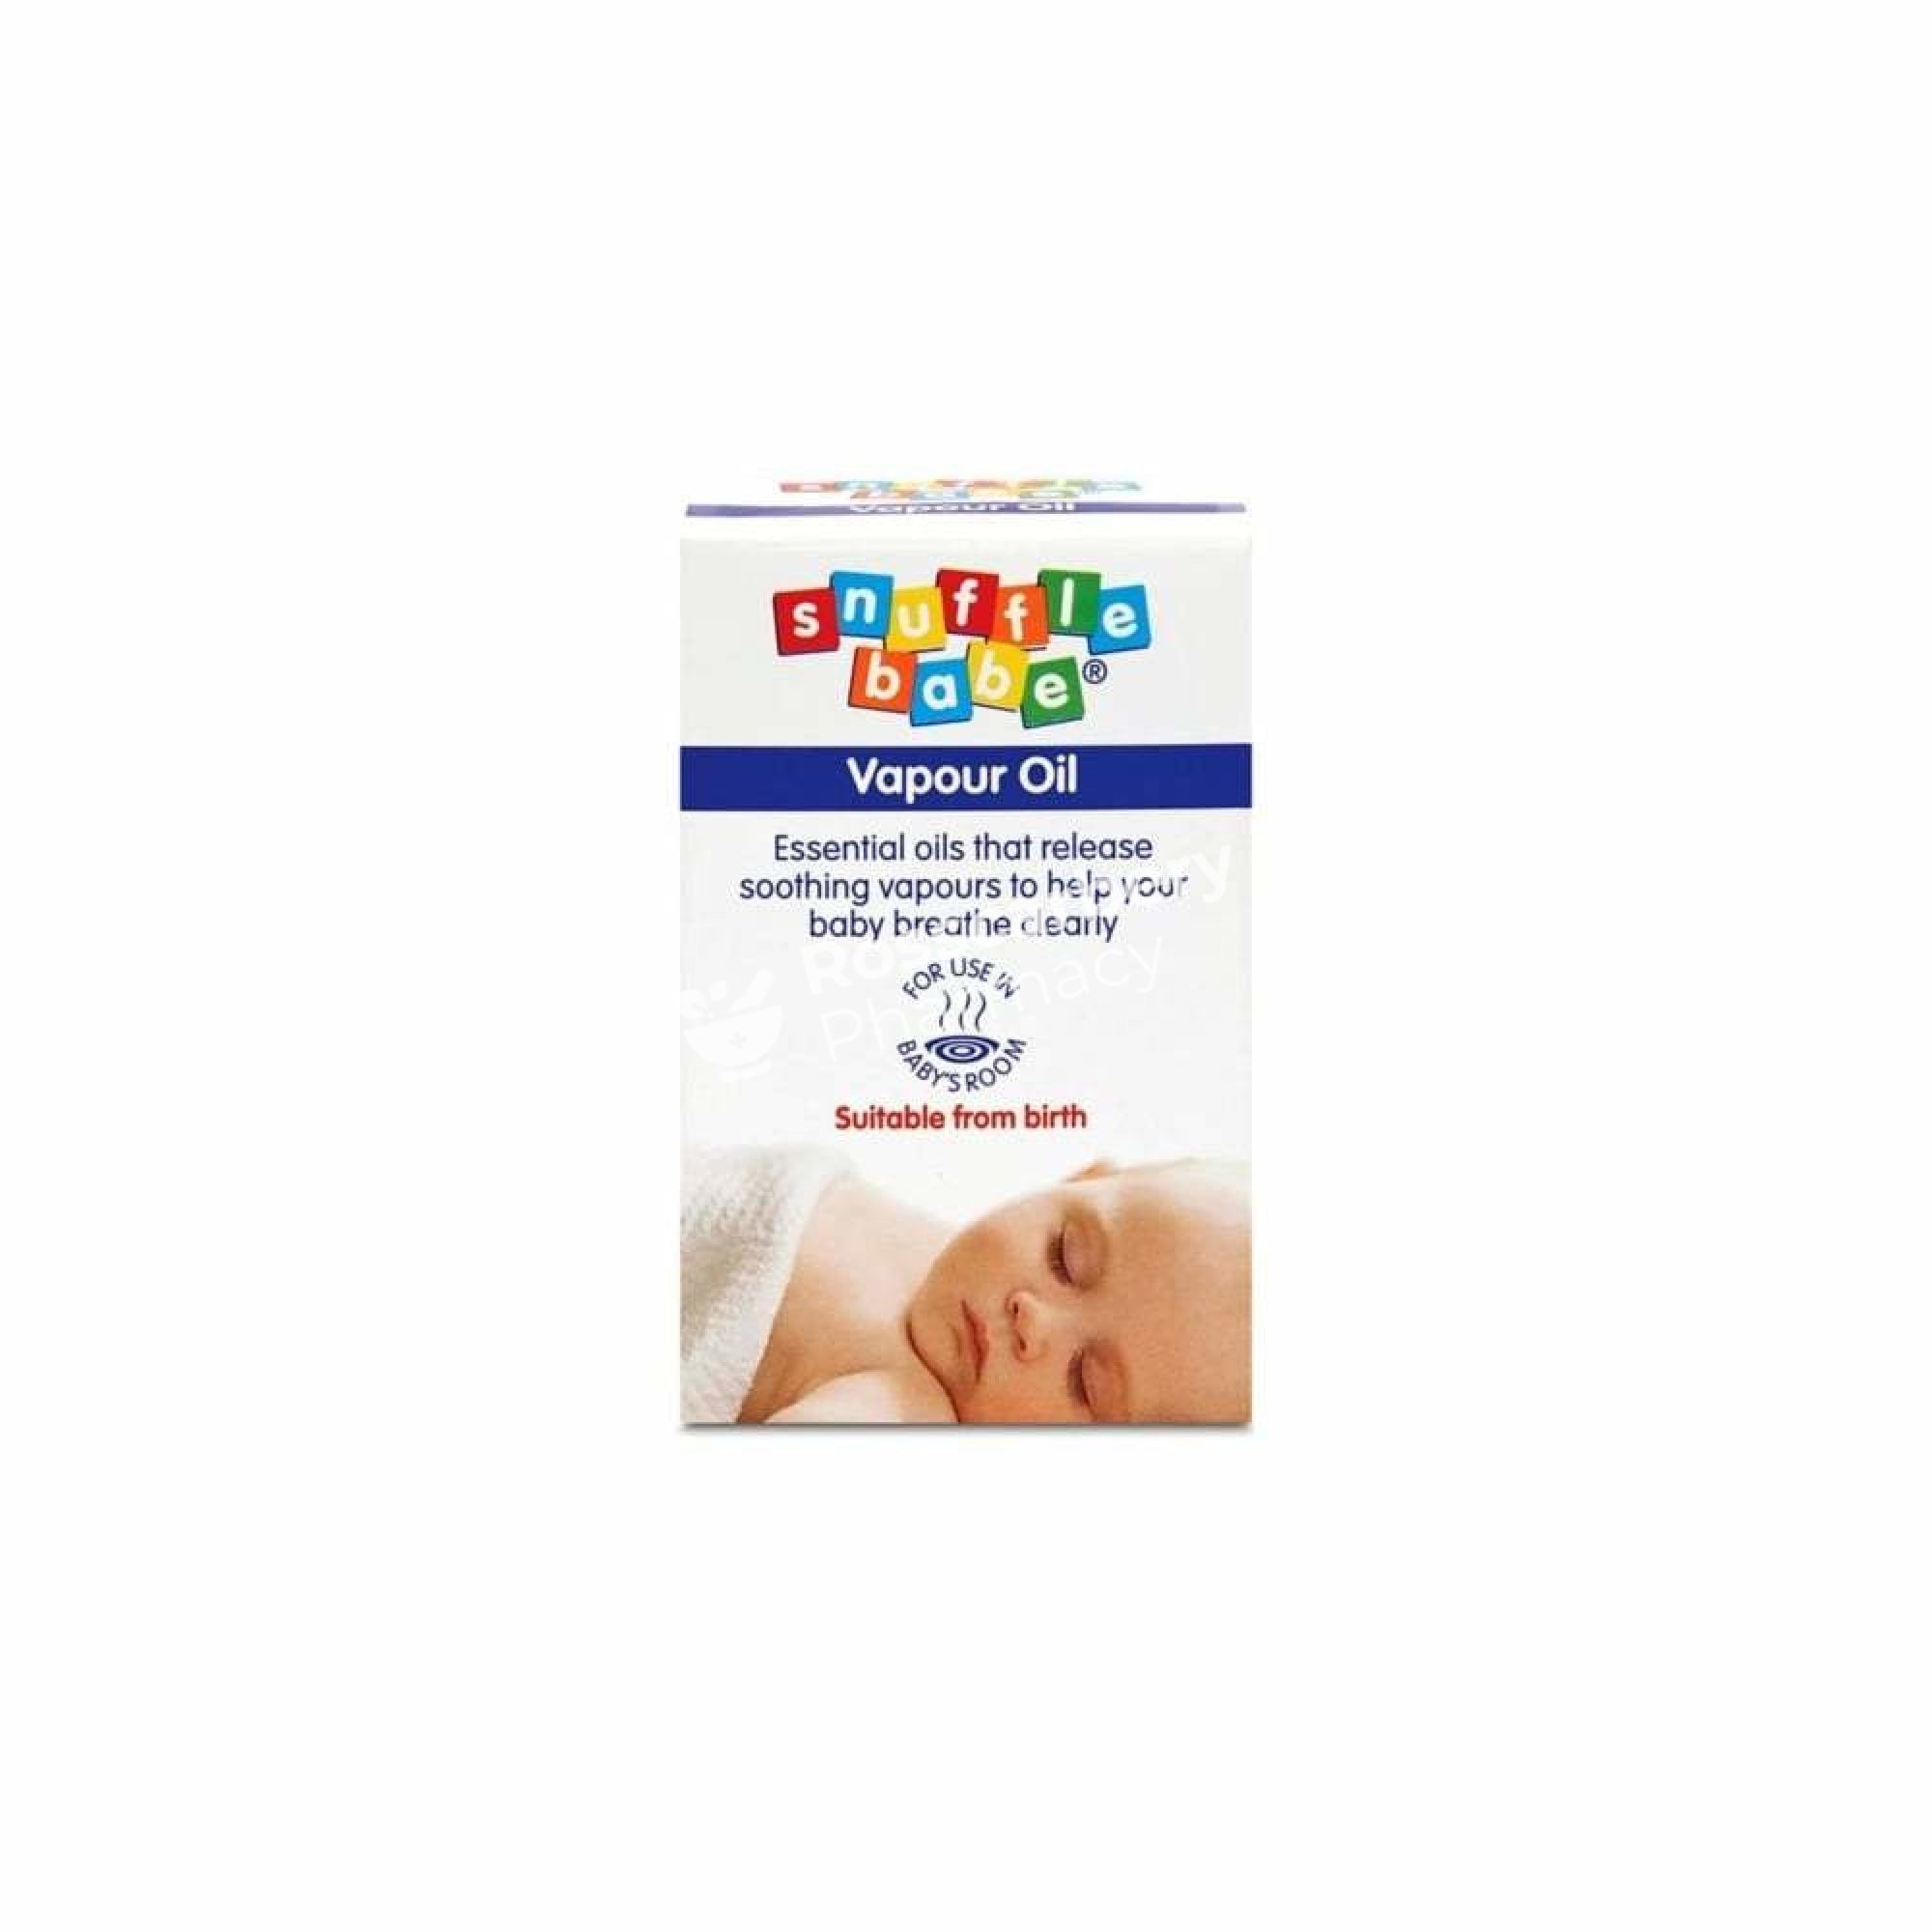 Snuffle Babe Vapour Oil - From Birth Childrens Decongestant